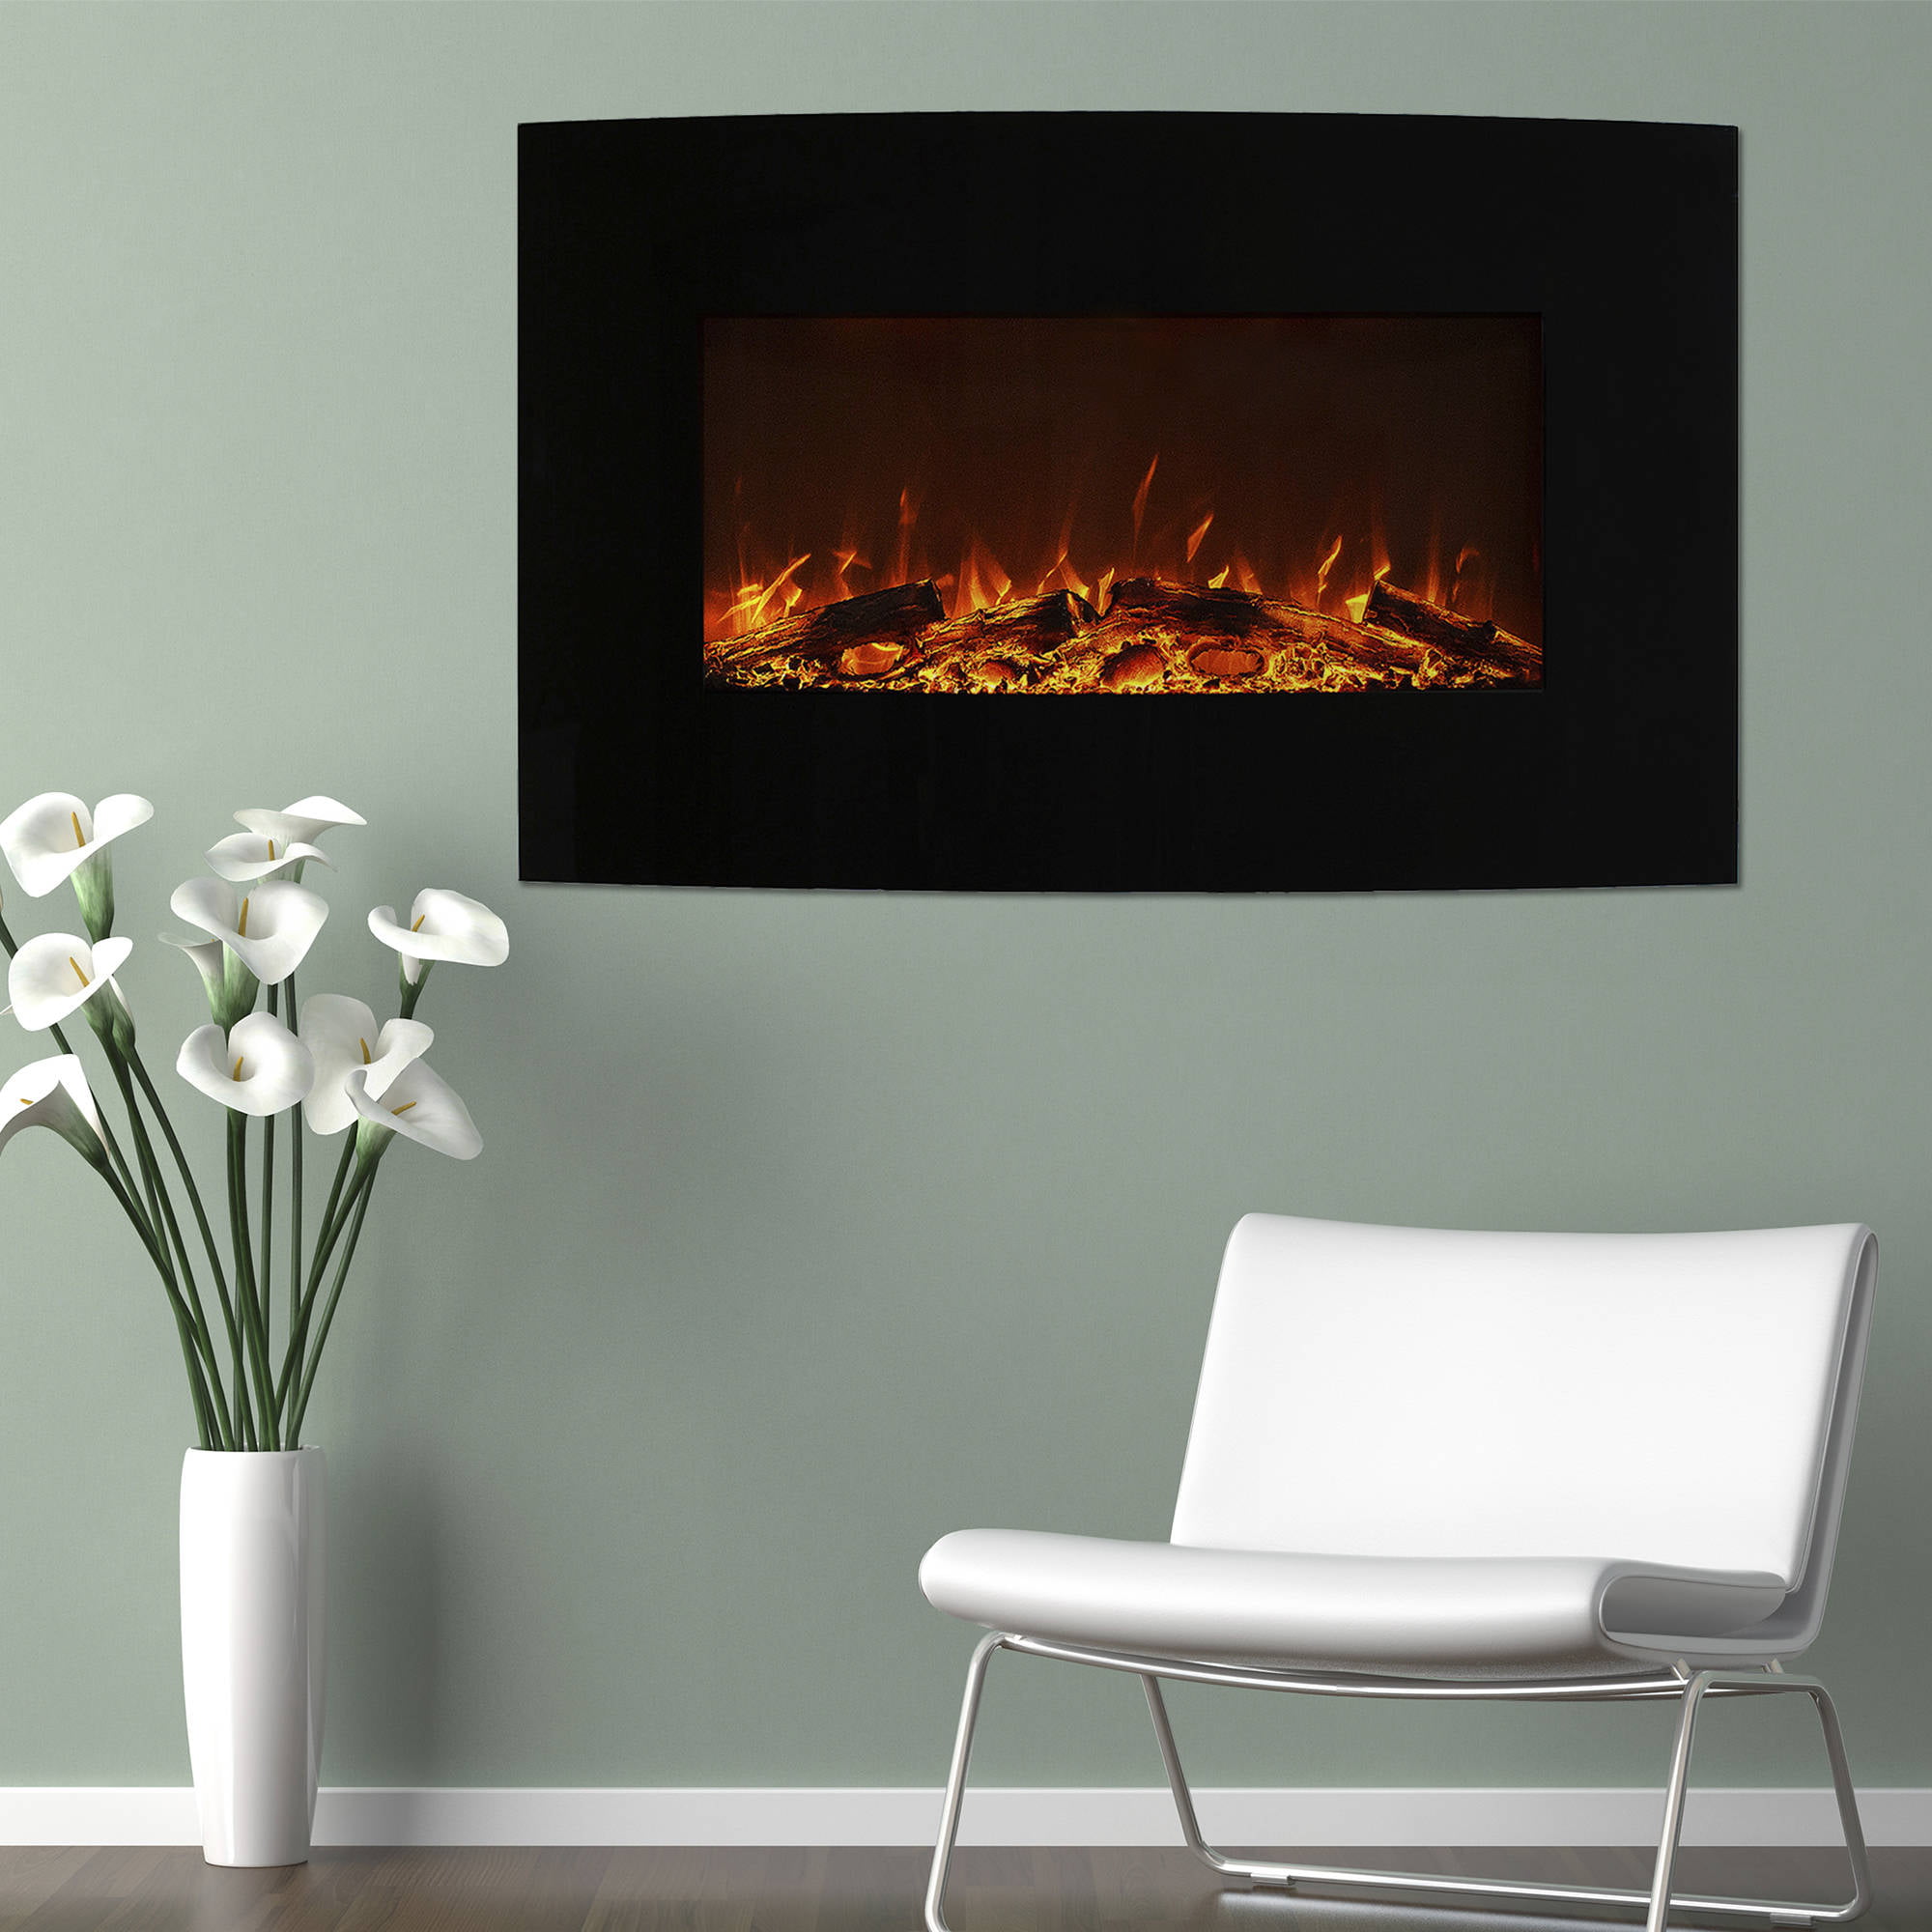 Wall Mounted Electric Fireplace, 36 Inch Electric Fireplace Heater